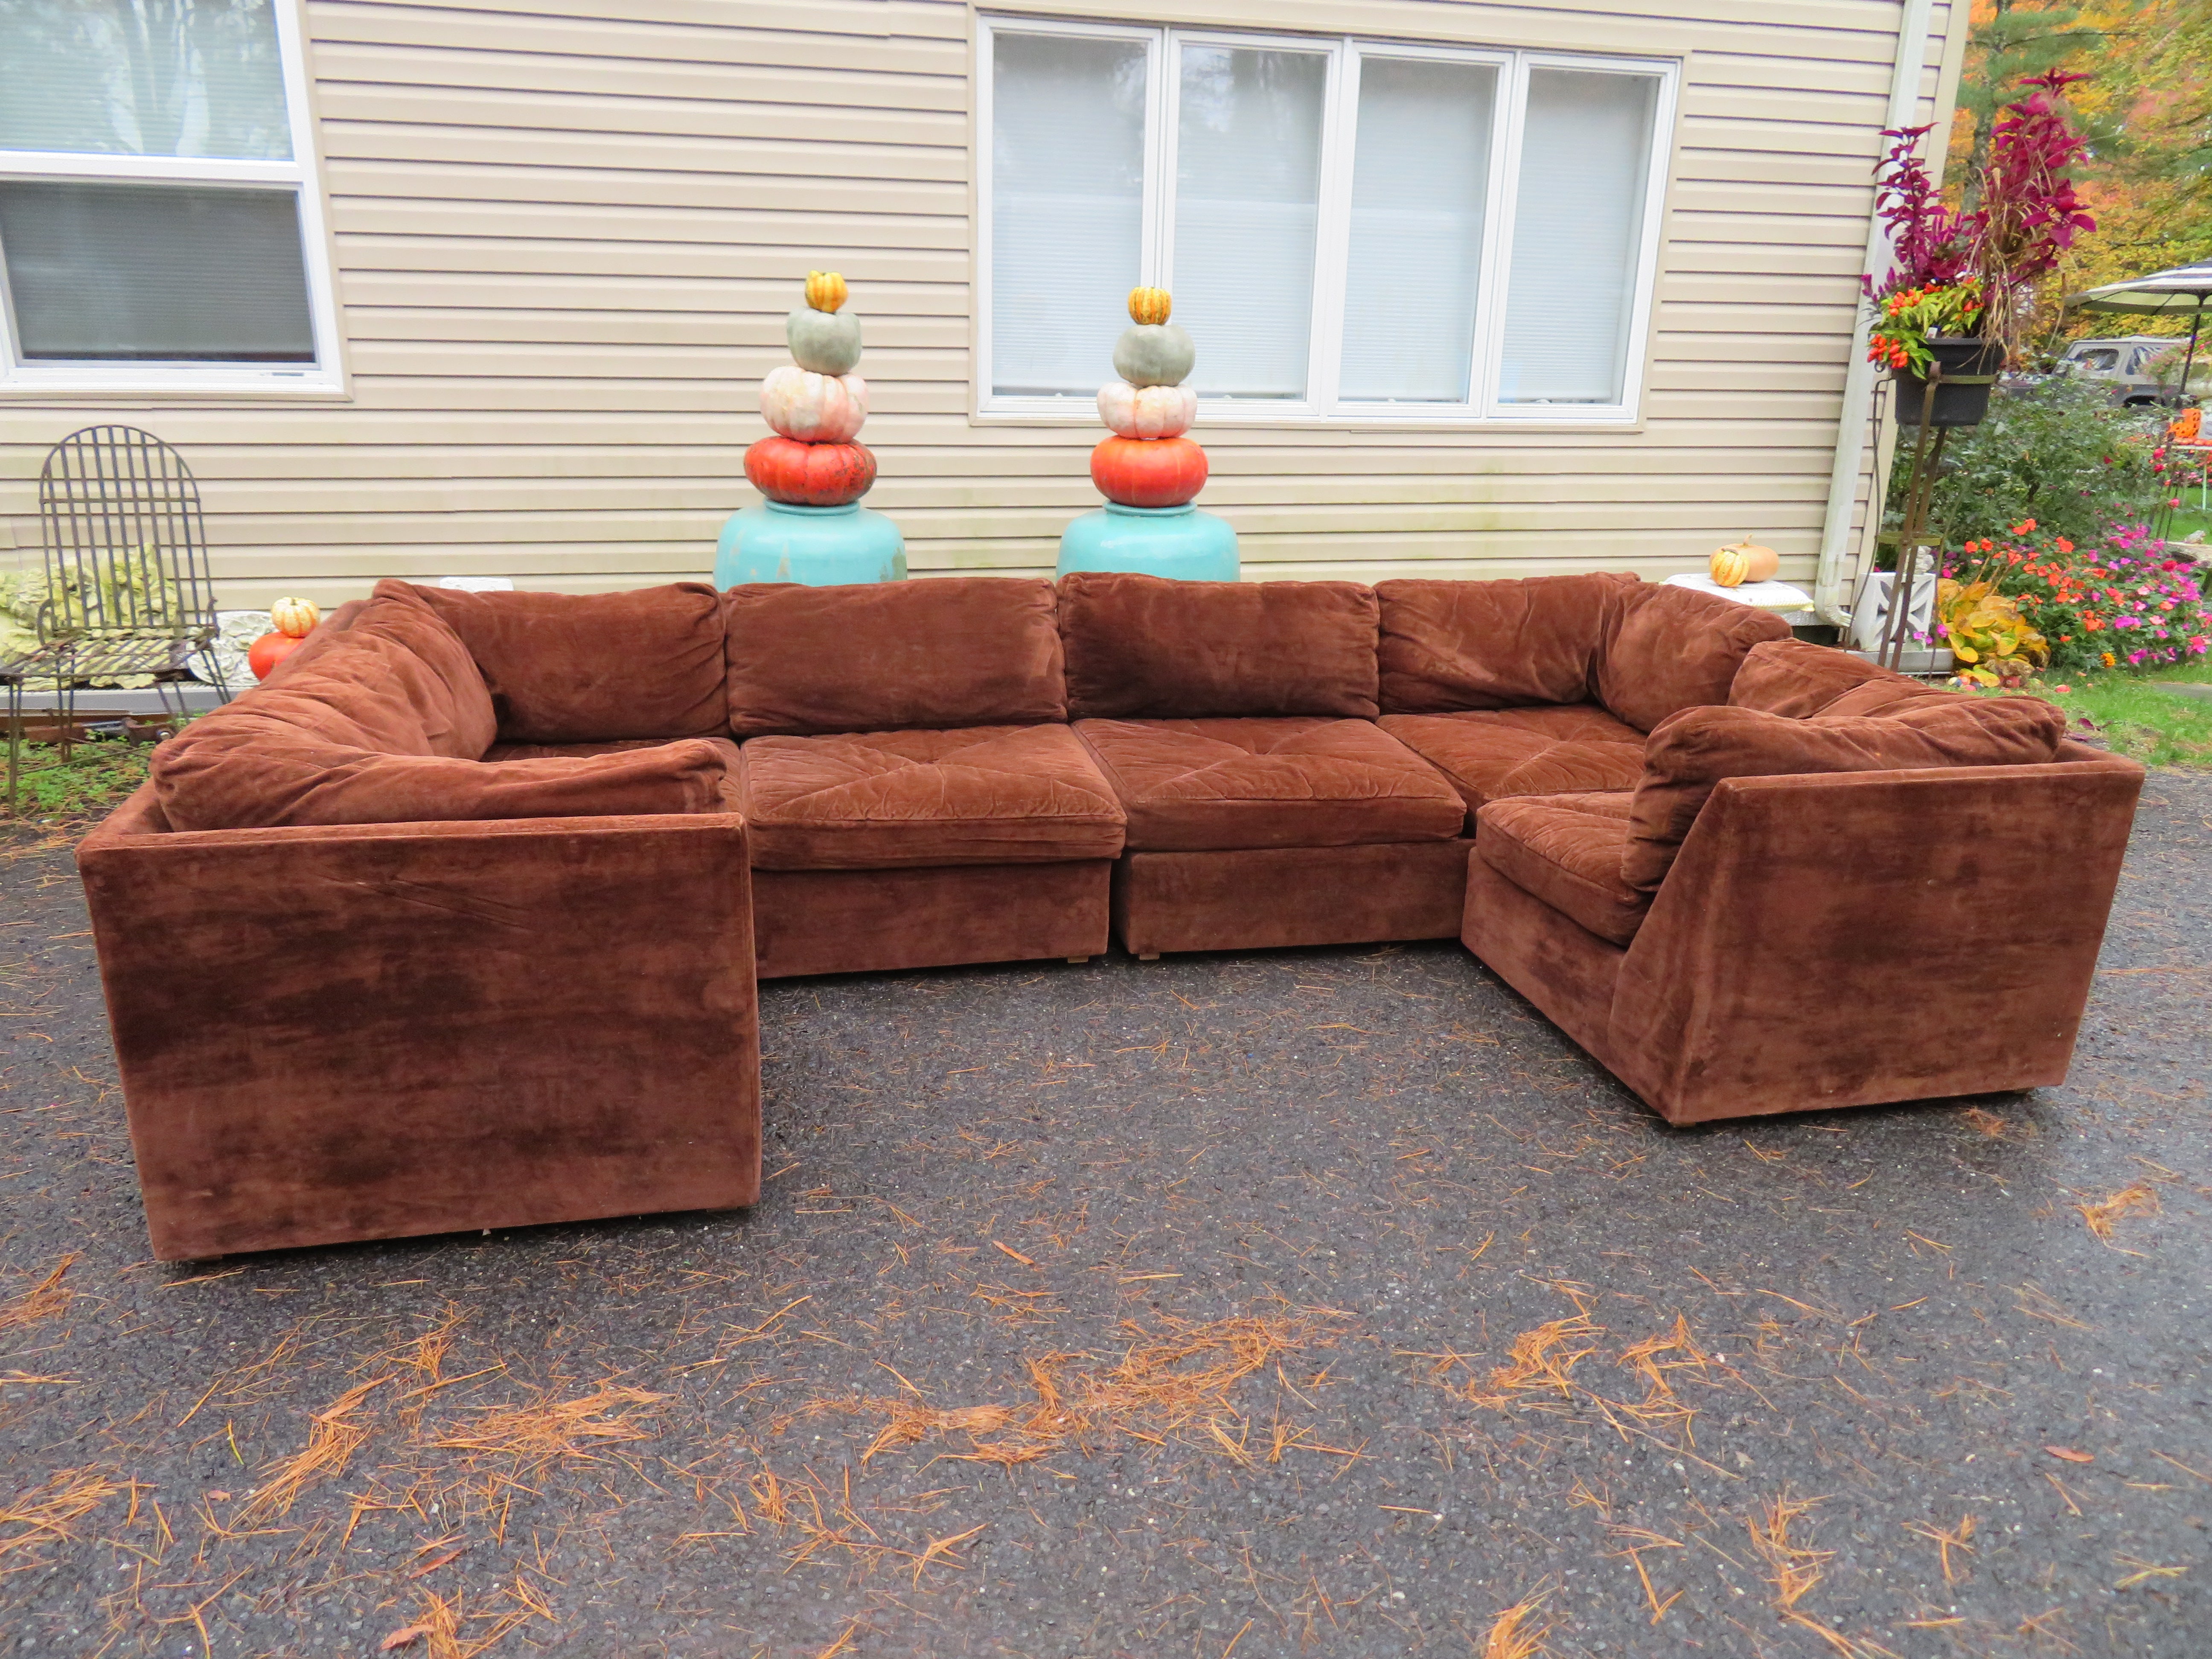 Wonderful 4-piece Milo Baughman style cube sofa sectional. This set consists of 2 one arm loveseats and 2 corner sections. This set can be set up as 2 sofas or as one big sectional-see photos. The one-arm loveseat pieces measure 28.5